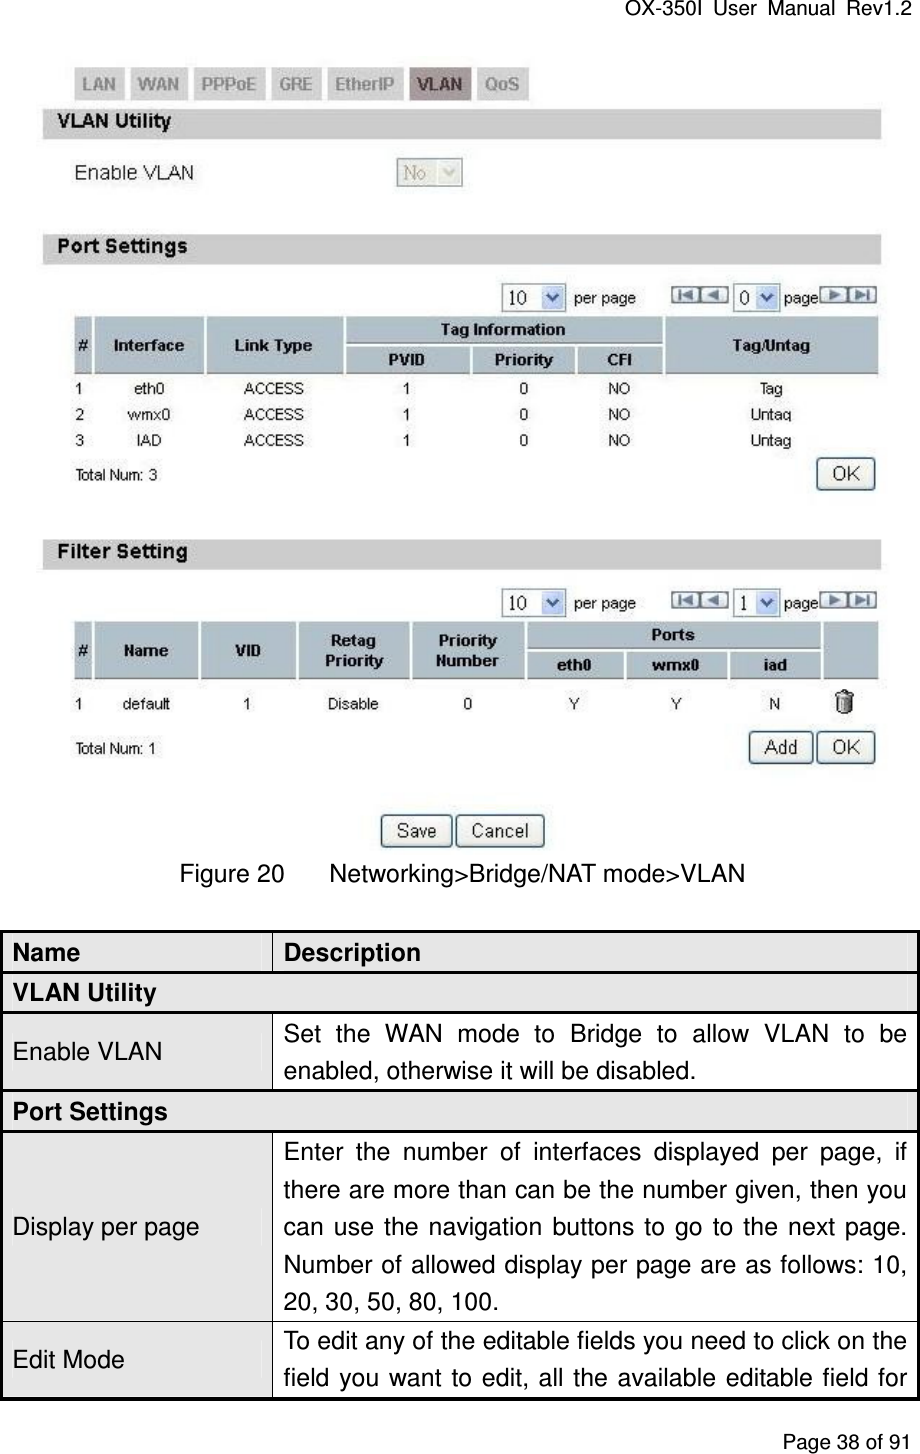 OX-350I  User  Manual  Rev1.2 Page 38 of 91  Figure 20  Networking&gt;Bridge/NAT mode&gt;VLAN Name  Description VLAN Utility Enable VLAN  Set  the  WAN  mode  to  Bridge  to  allow  VLAN  to  be enabled, otherwise it will be disabled. Port Settings Display per page Enter  the  number  of  interfaces  displayed  per  page,  if there are more than can be the number given, then you can  use  the  navigation  buttons to go  to the  next page. Number of allowed display per page are as follows: 10, 20, 30, 50, 80, 100. Edit Mode  To edit any of the editable fields you need to click on the field  you want  to edit, all  the available editable field for 